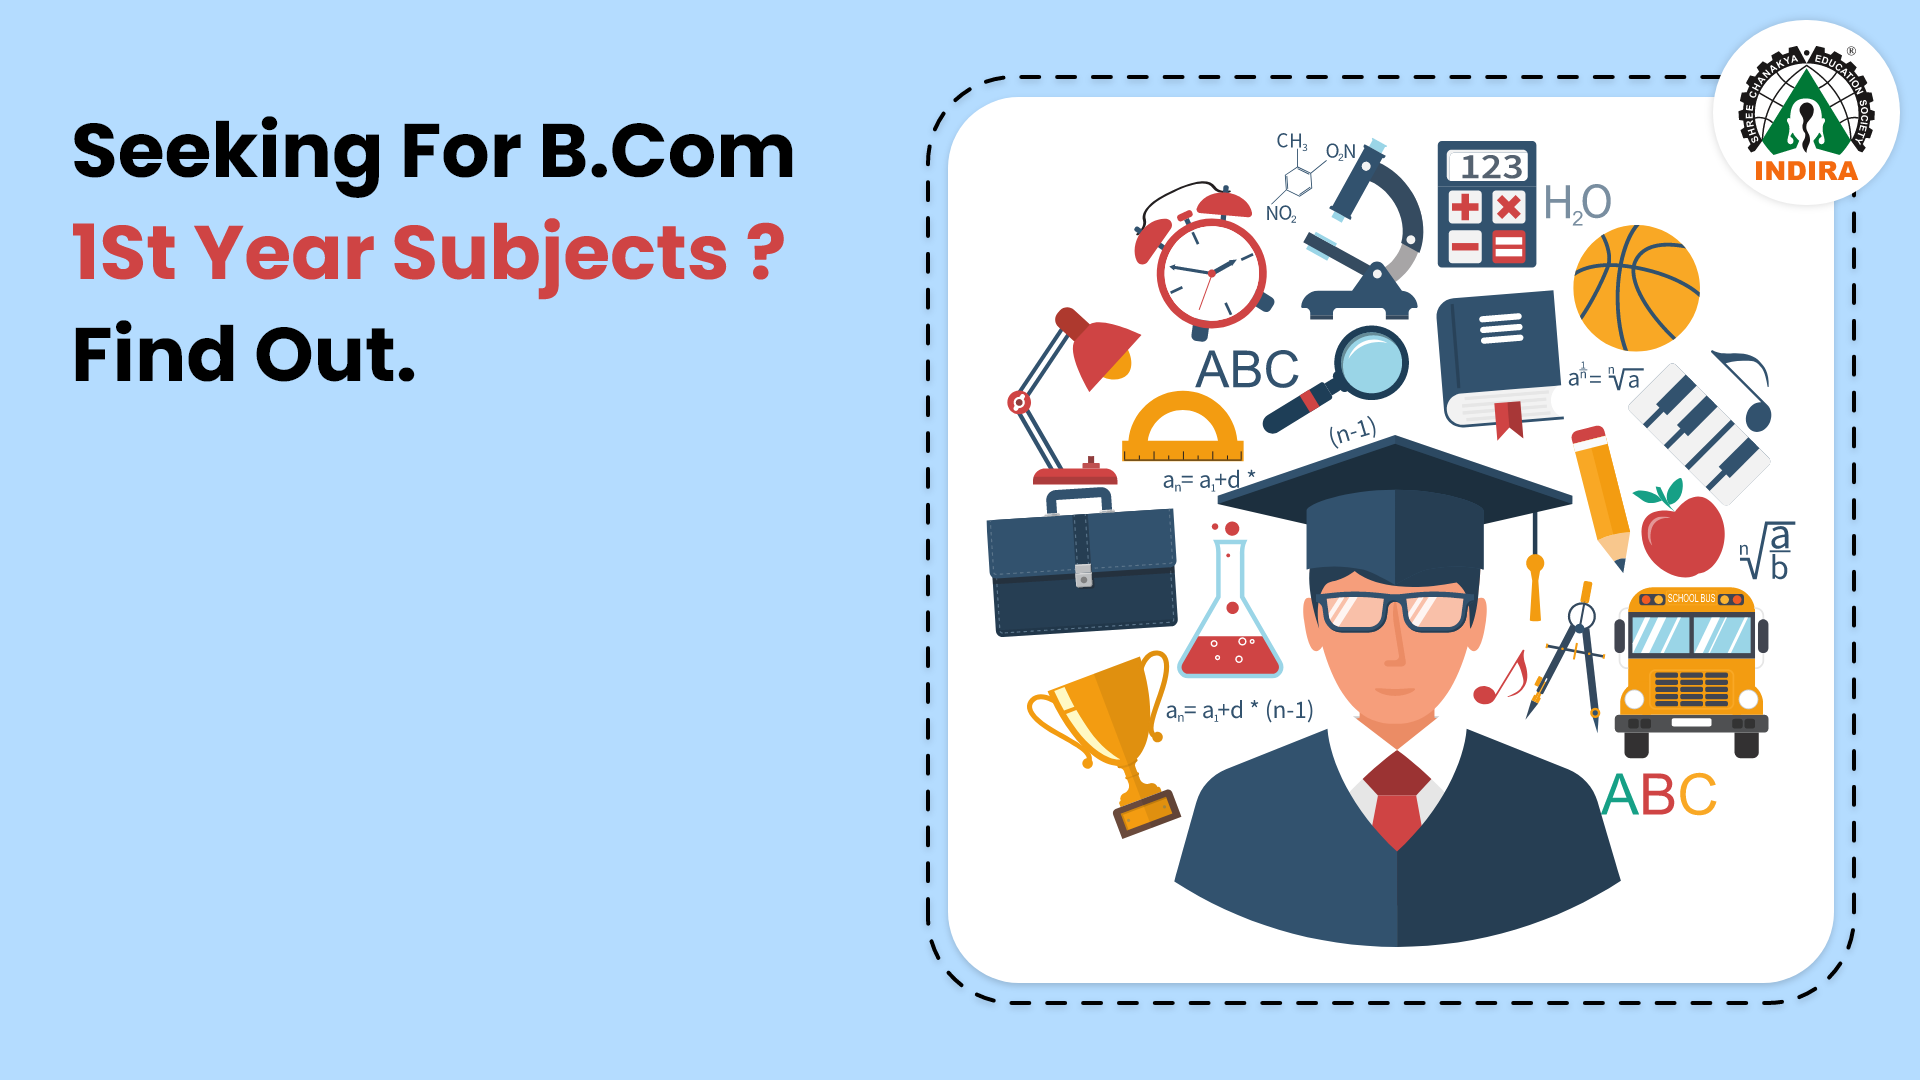 Seeking For B.Com 1st Year Subjects? Find Out!